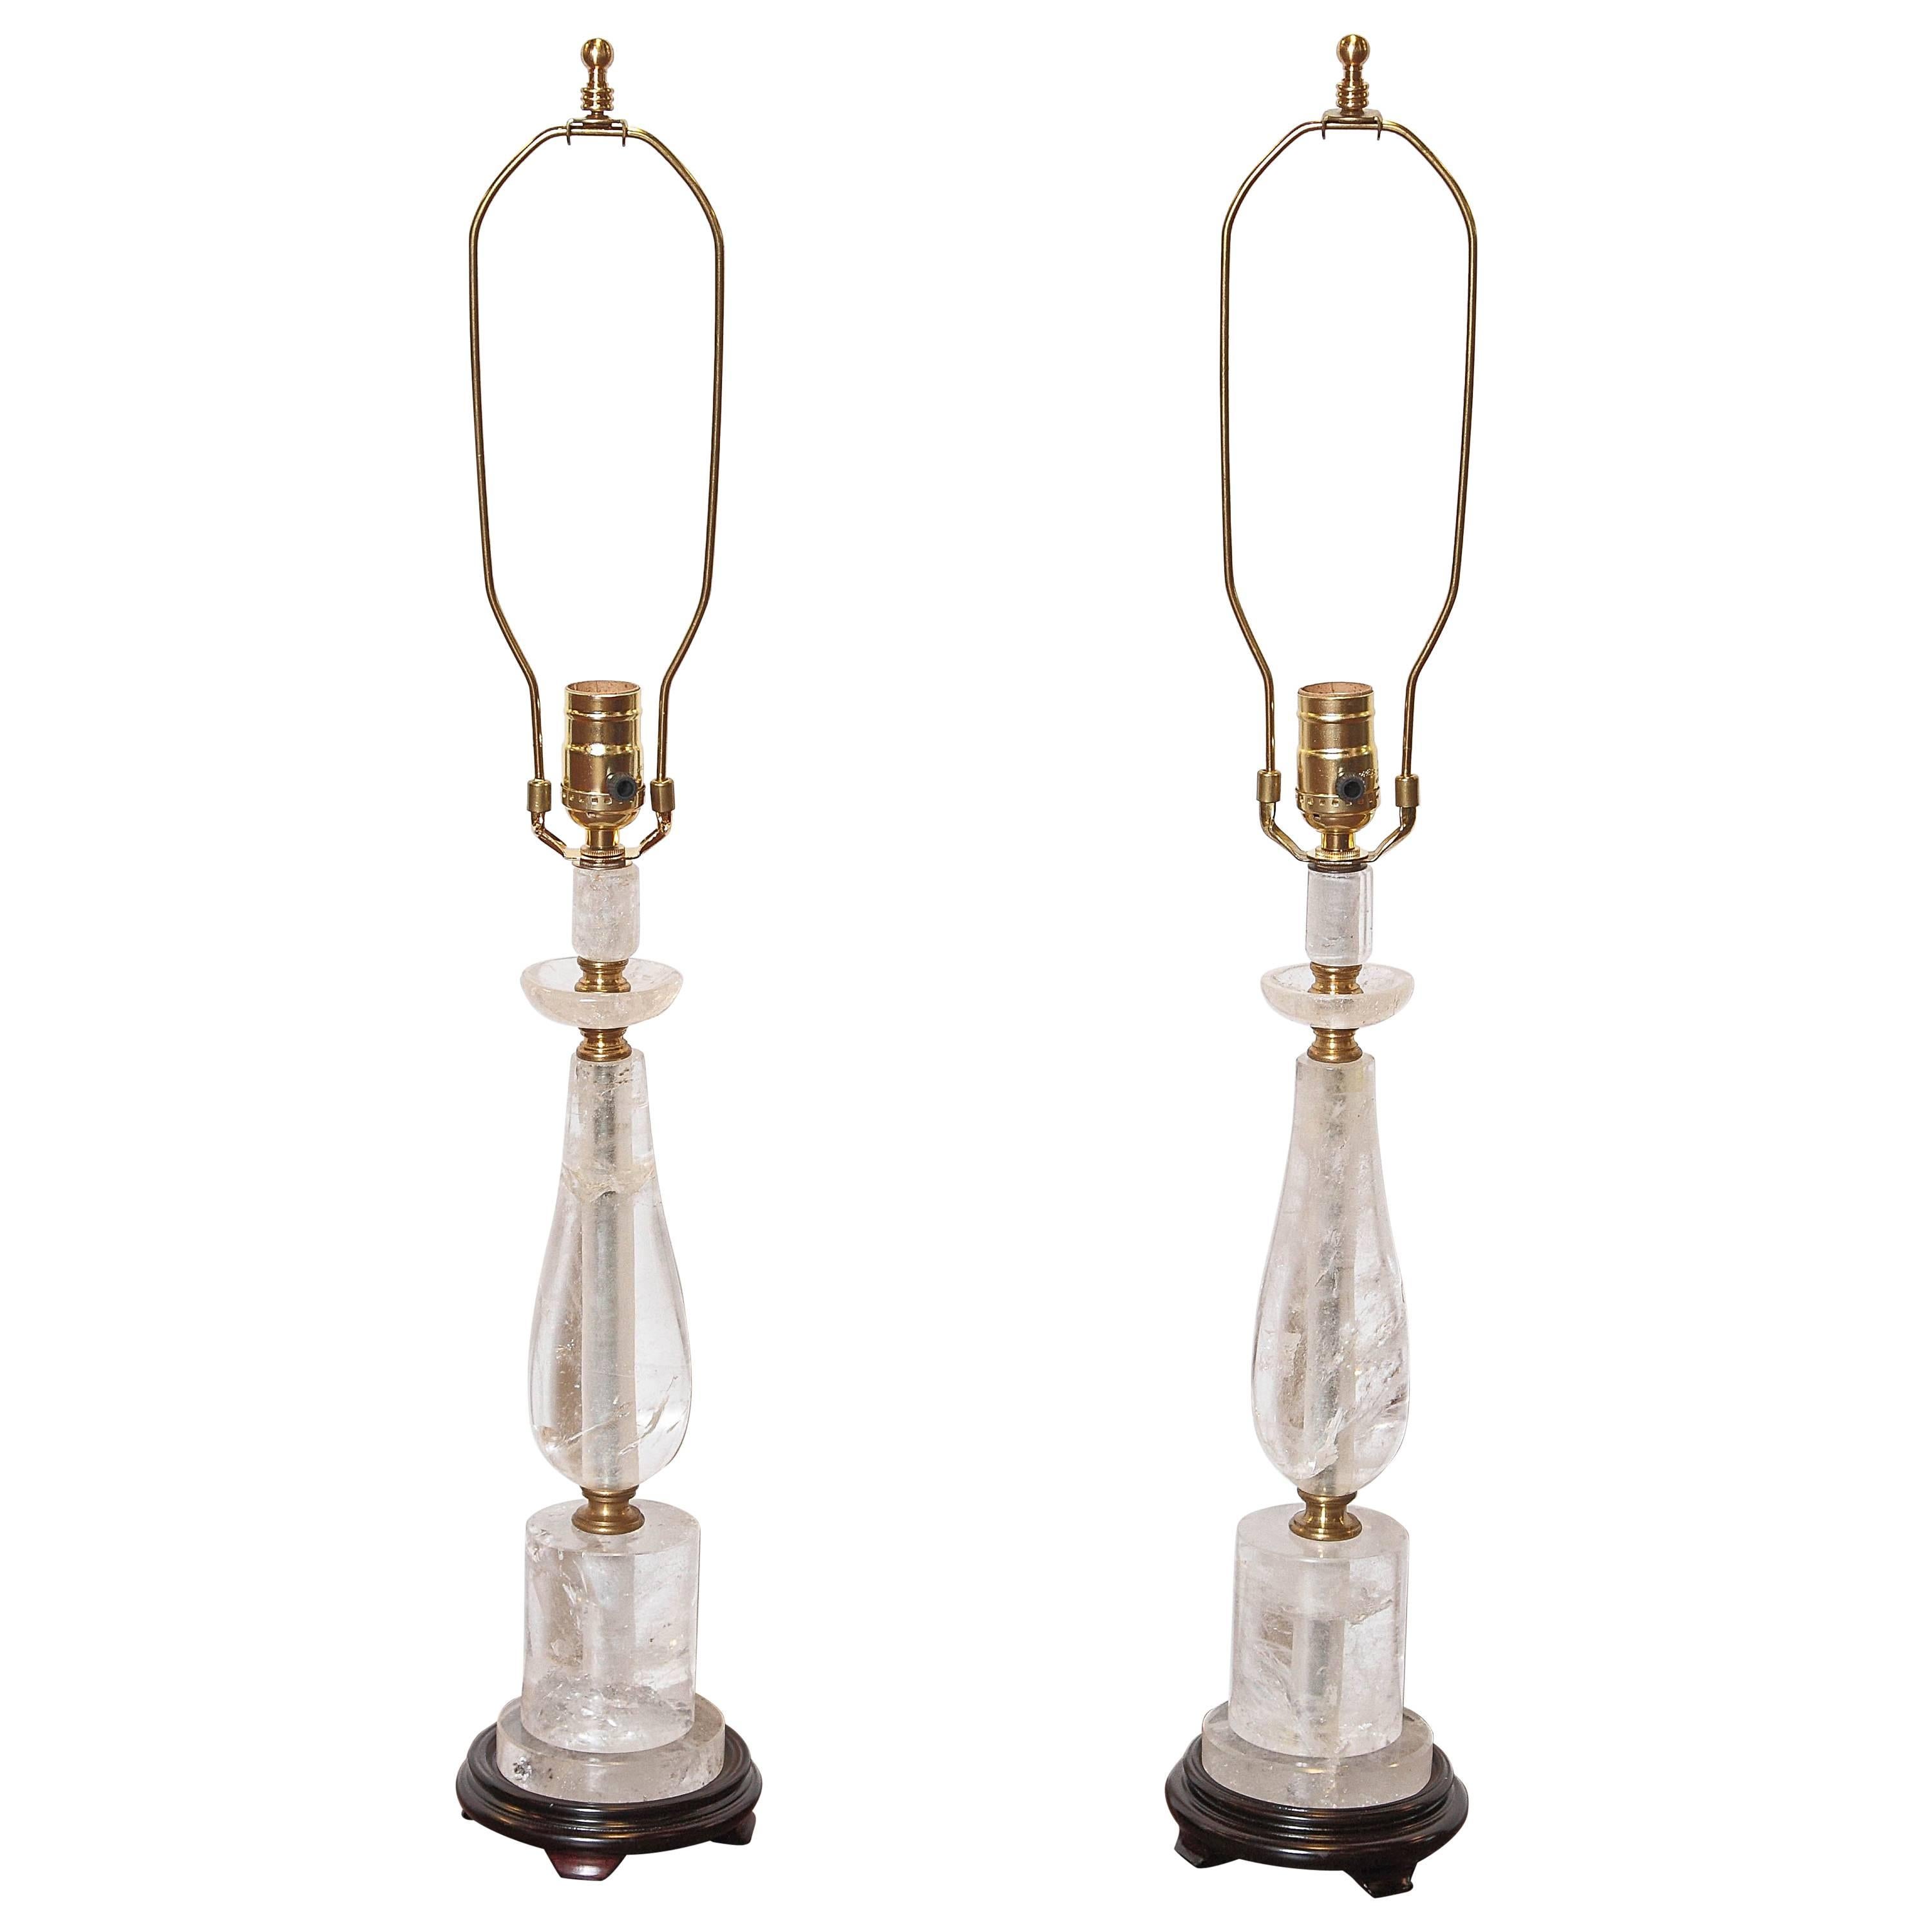 Pair of Rock Crystal Lamps with Brass Fittings